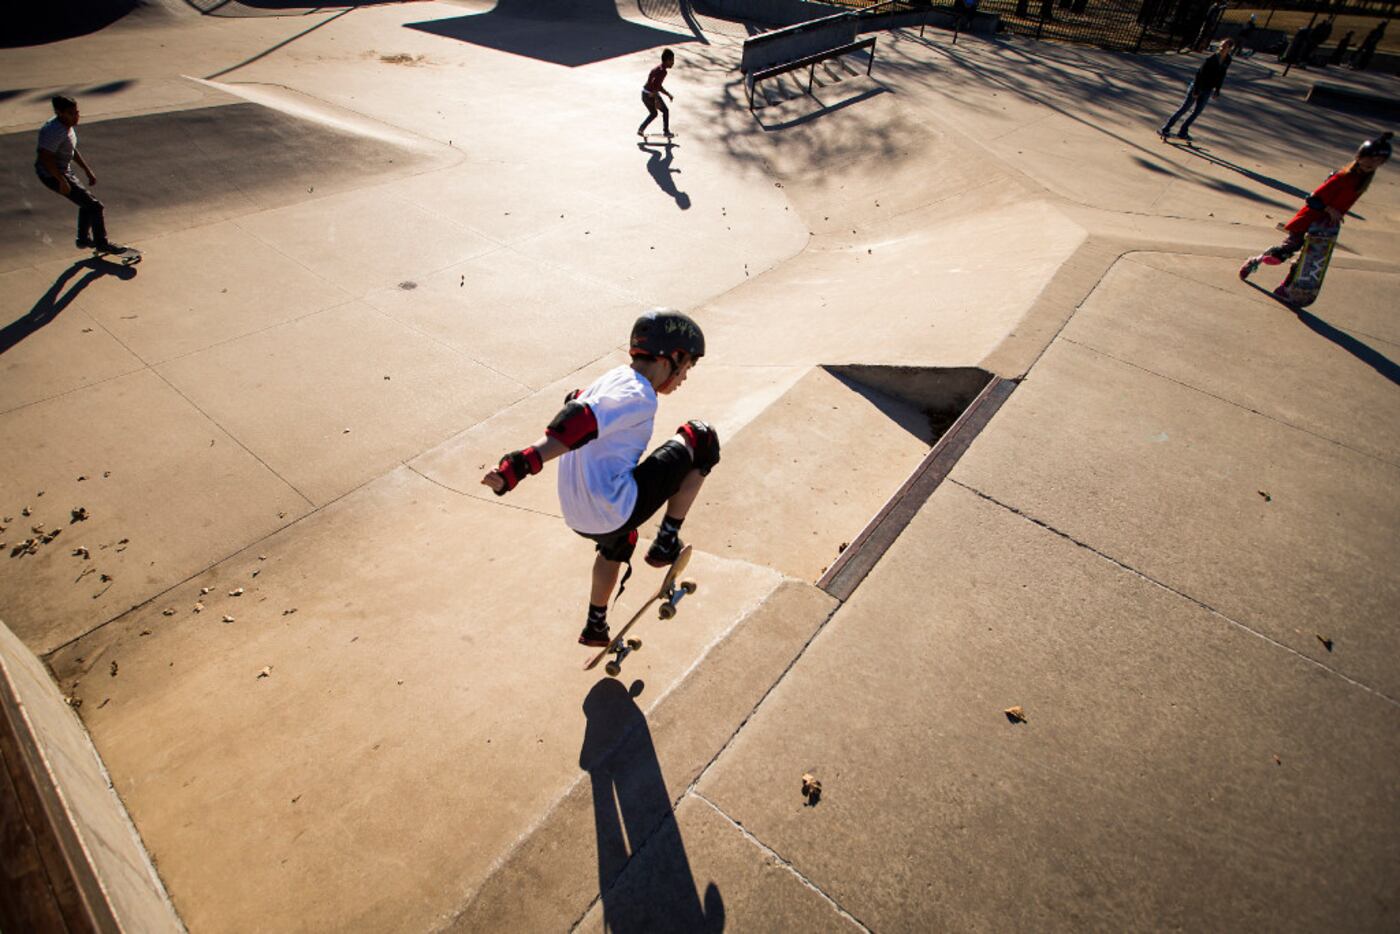 Travis Haley, 9, rides his skateboard at Lively Pointe Skate Park in Irving. (Smiley N....